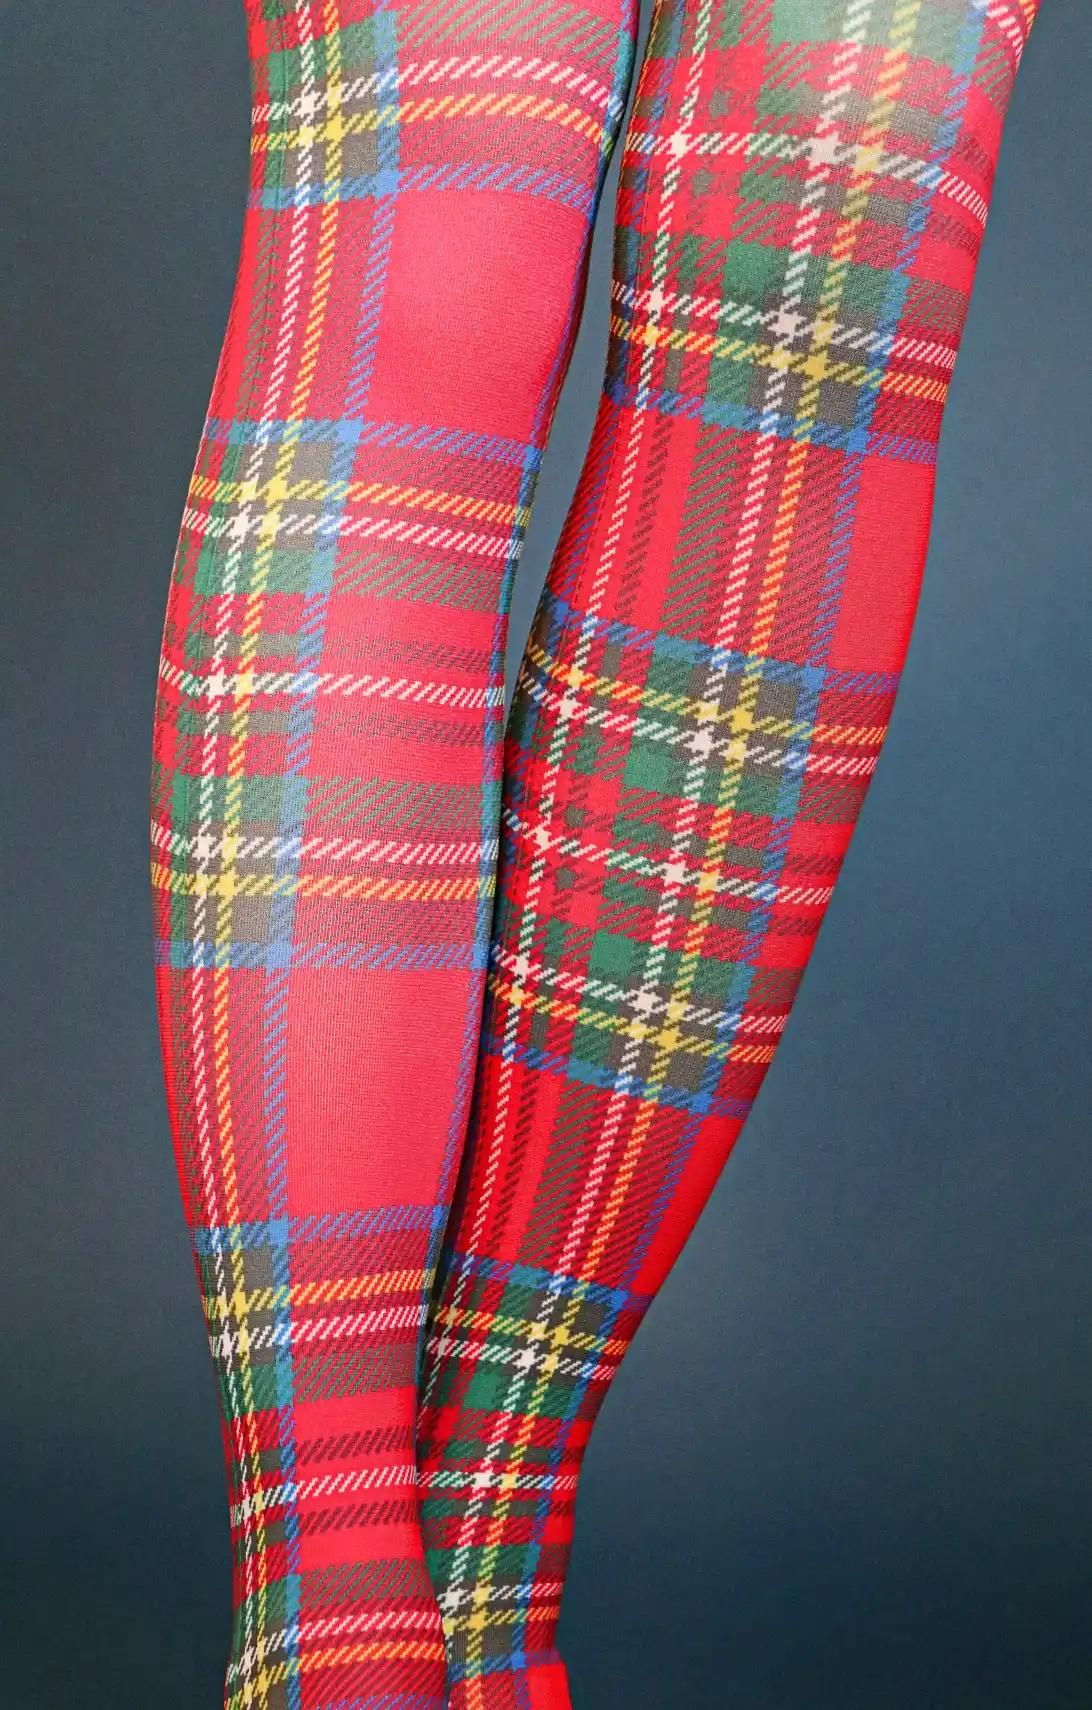 Original Red Tartan Printed Tights - Red - Accessories - PRODUCTS